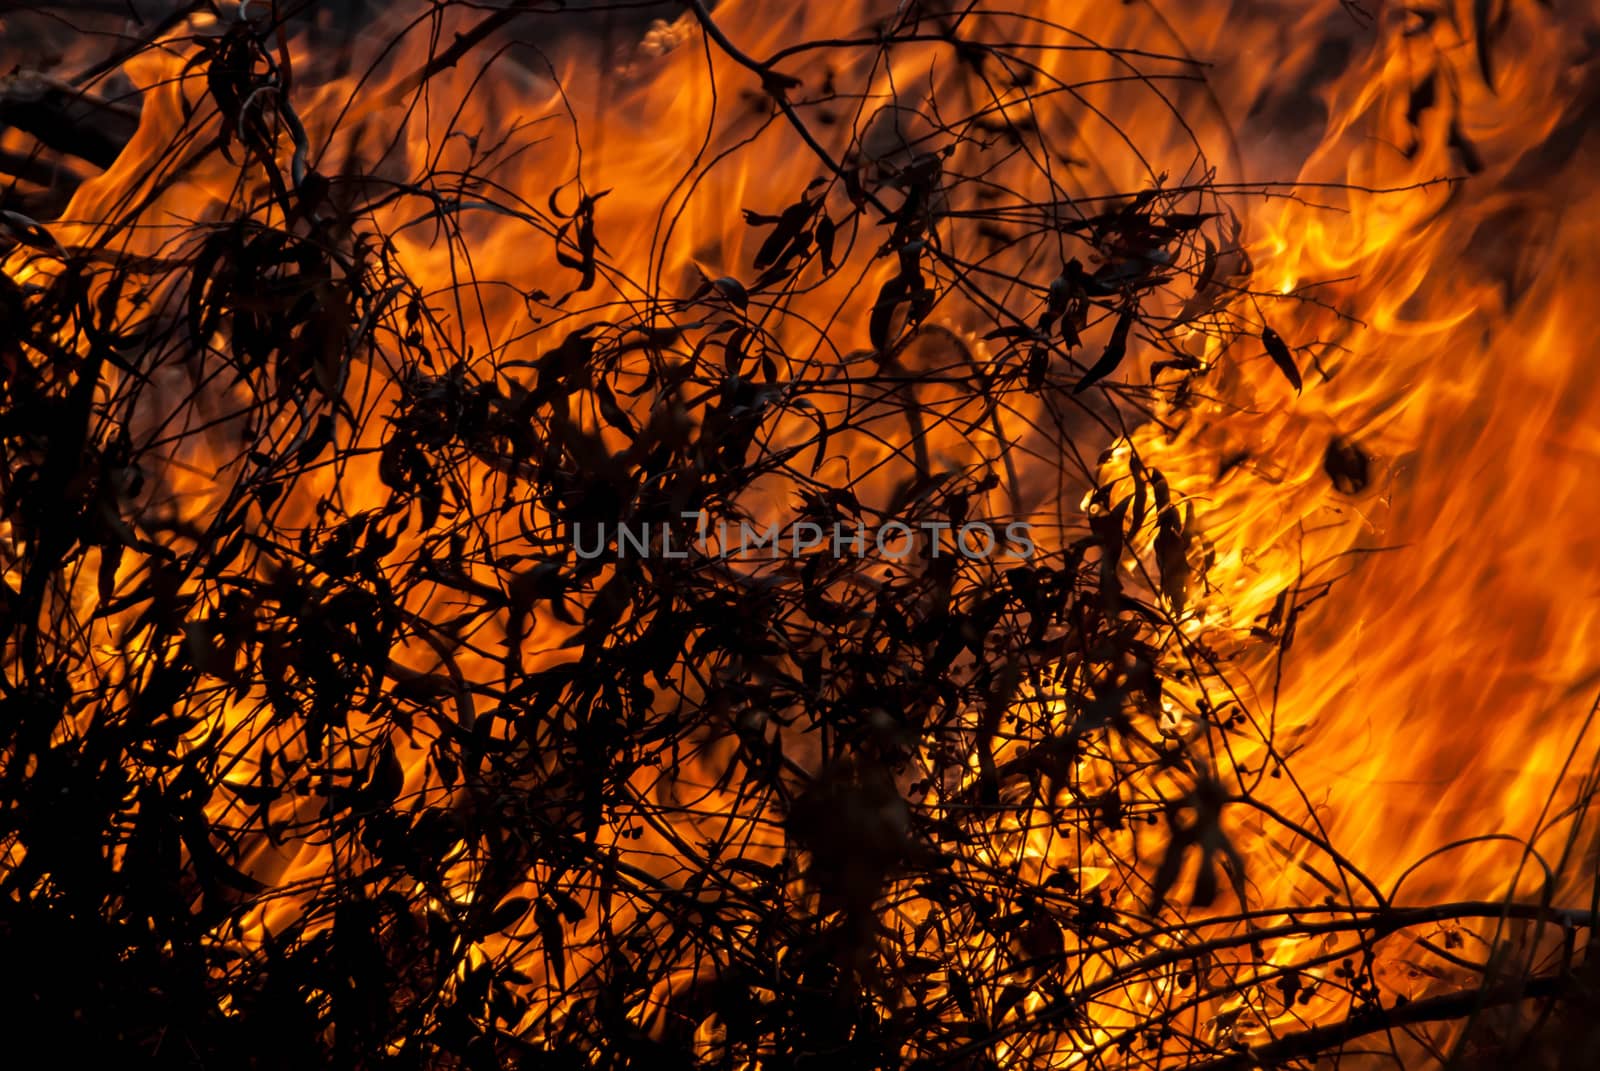 Burning Leaves in a wild fire with branches in the foreground